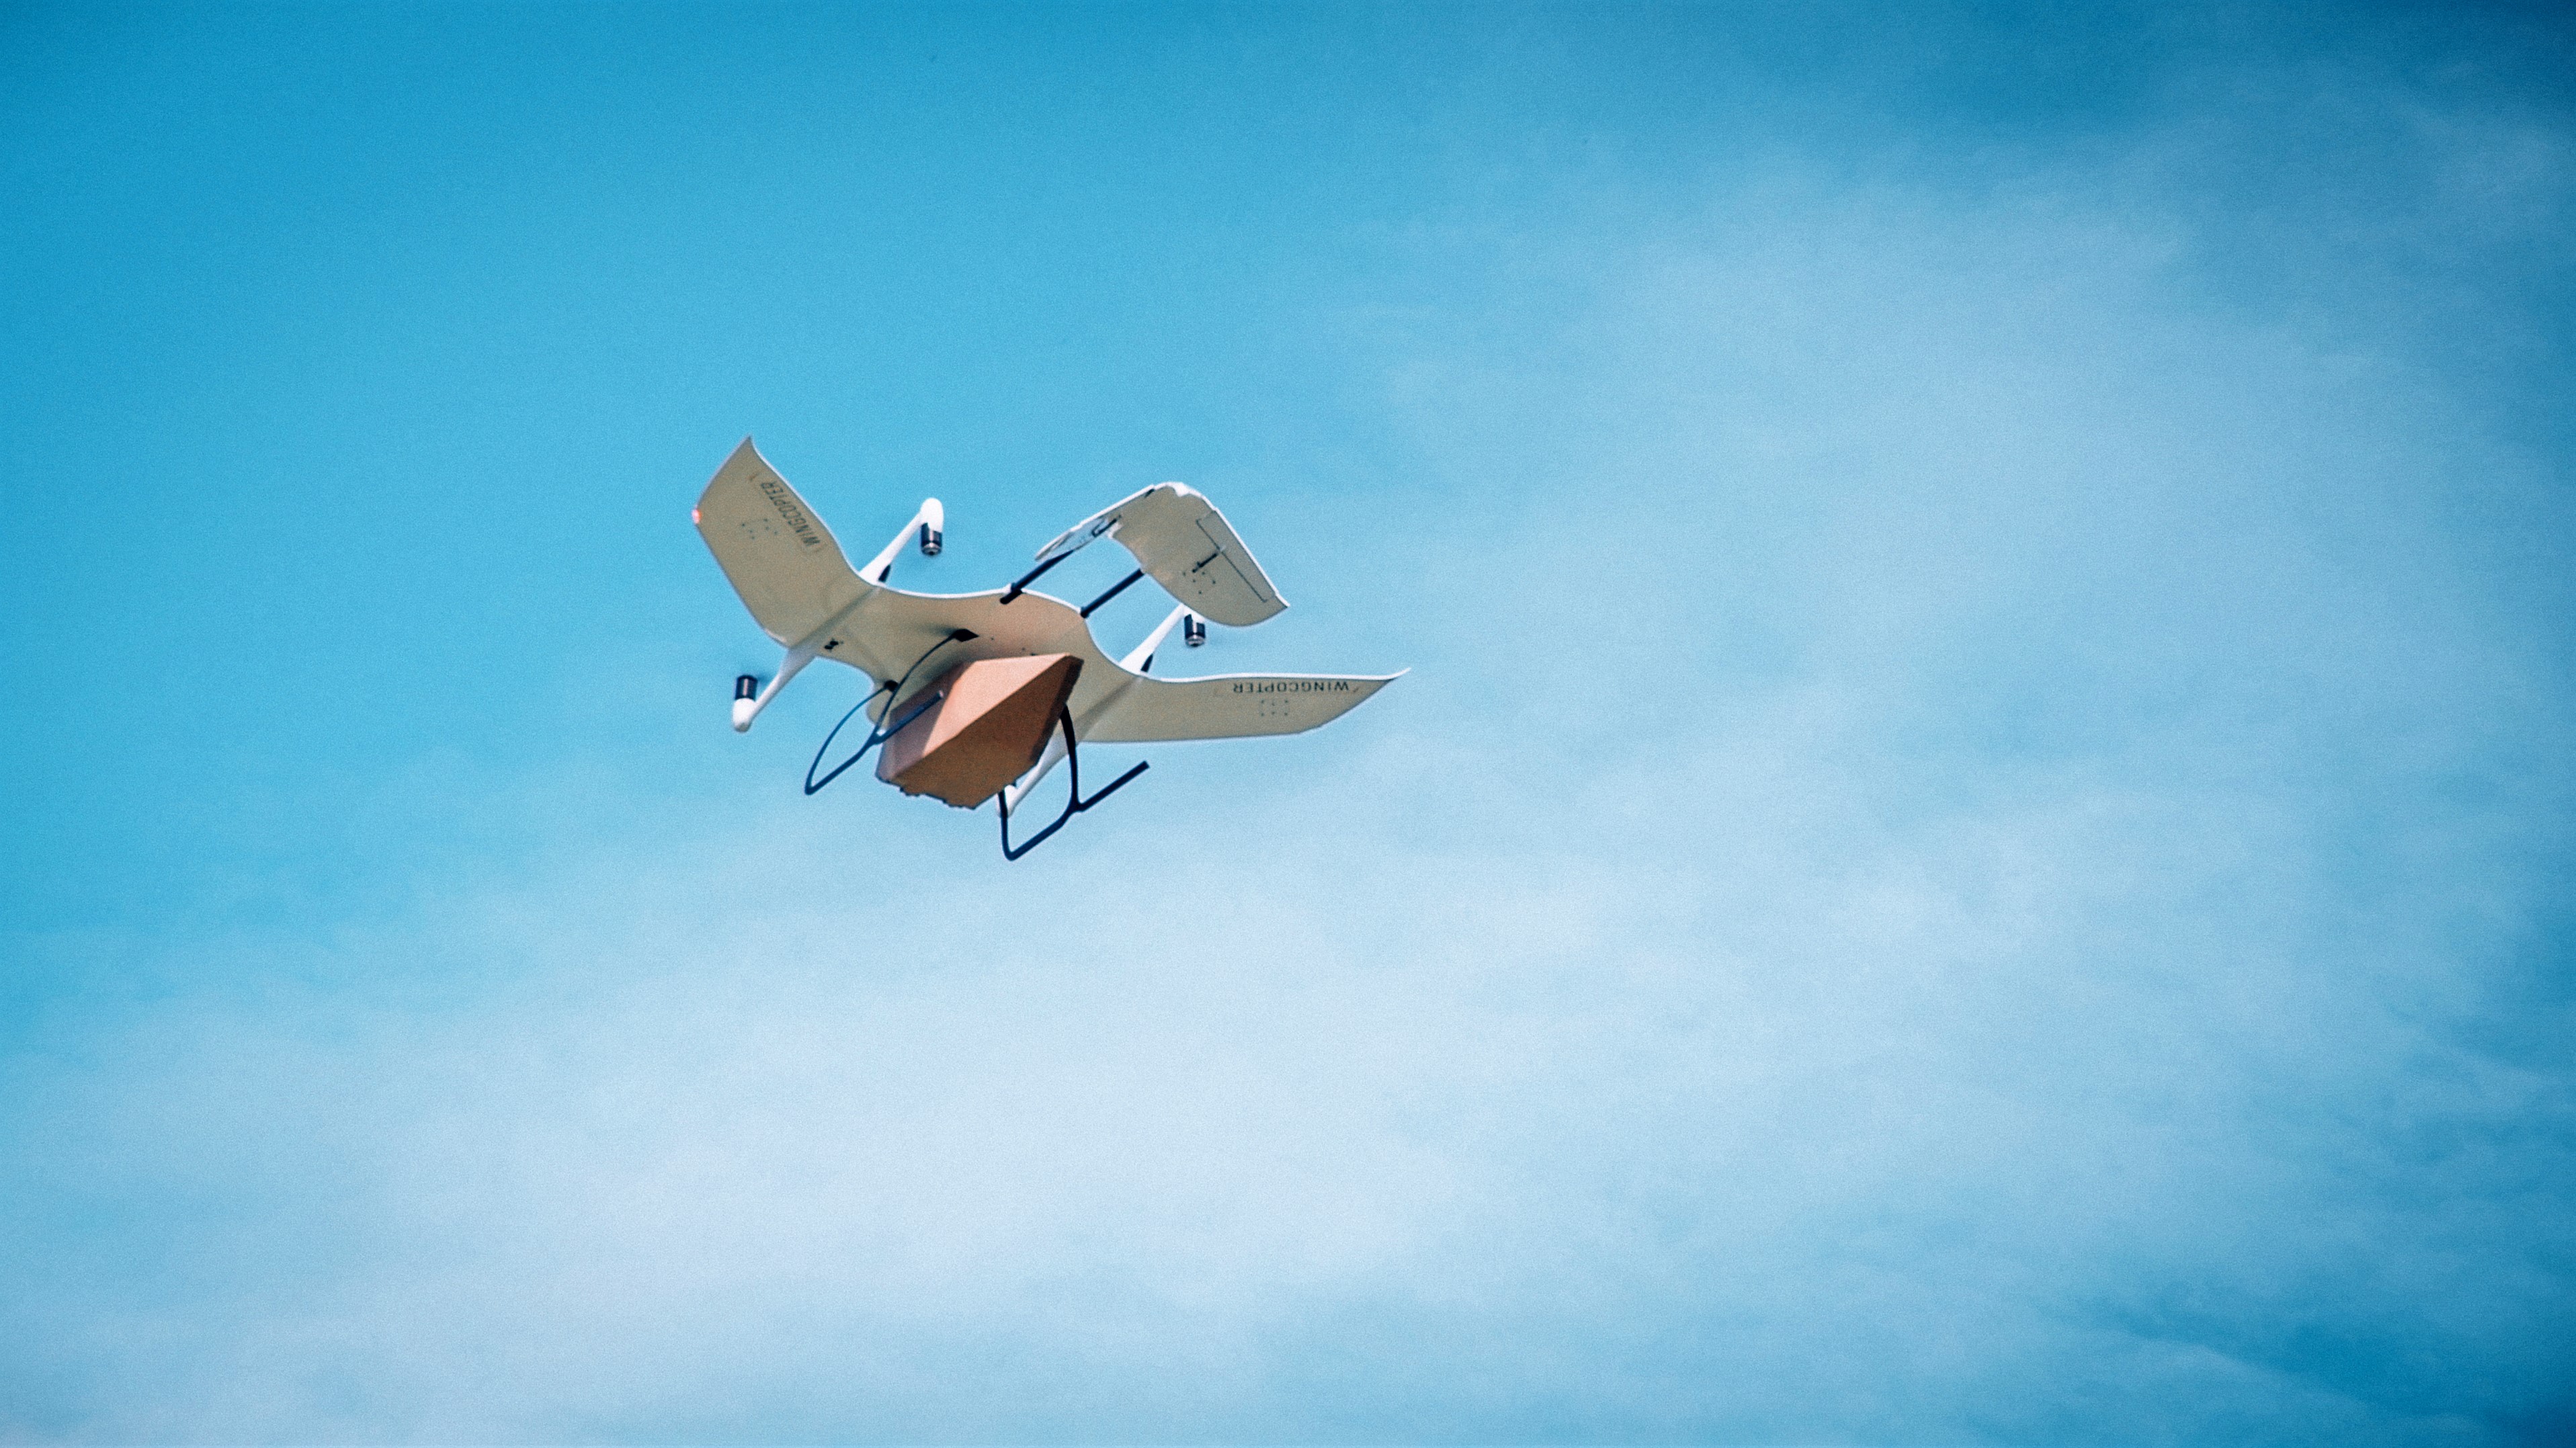 Drone flies blood samples to speed up care [Video]